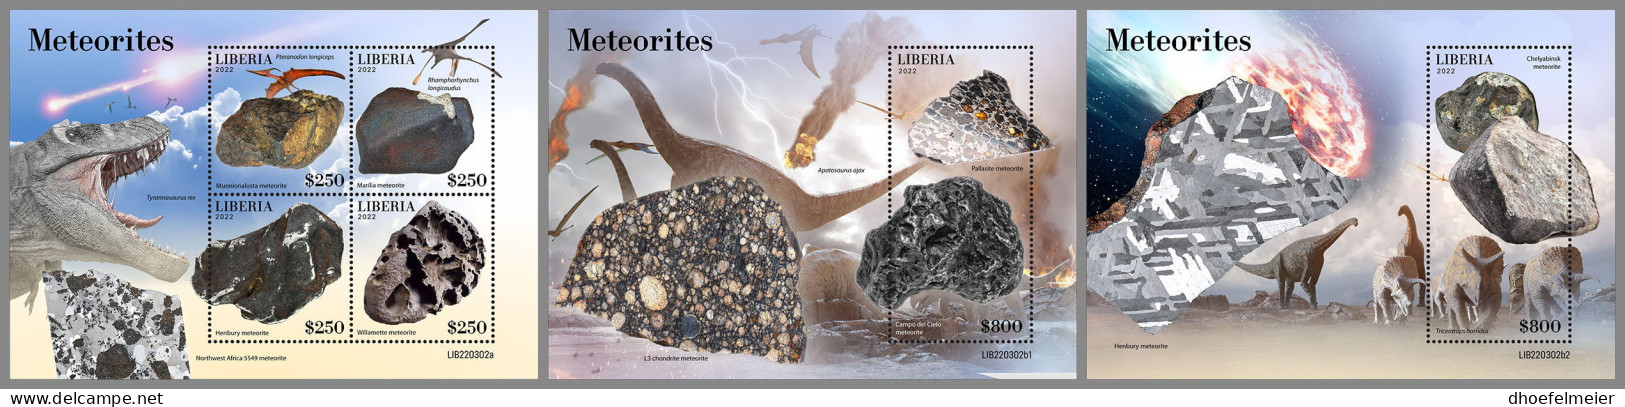 LIBERIA 2022 MNH Meteorites Meteoriten M/S+2S/S - OFFICIAL ISSUE - DHQ2312 - Minerals